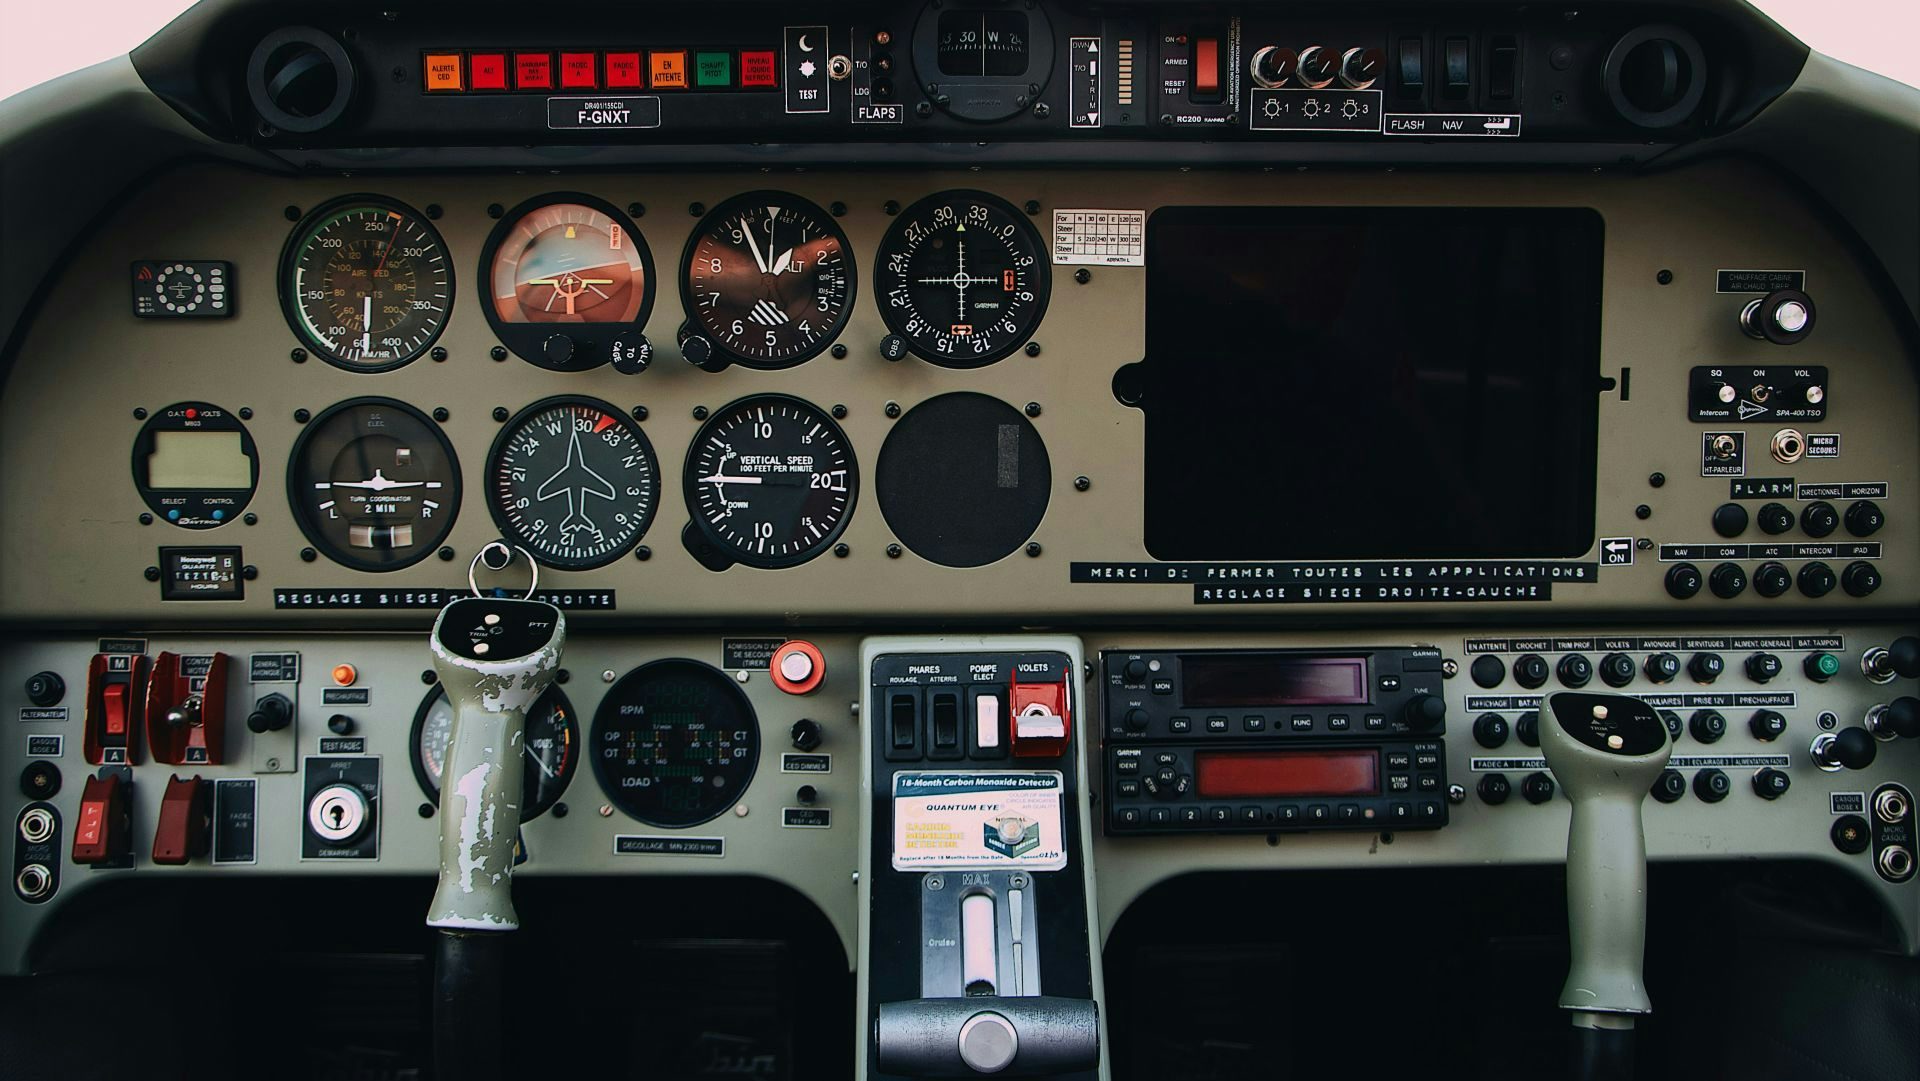 Do joysticks and specialist hardware matter in Flight Sim? Can you recommend any? Discuss!